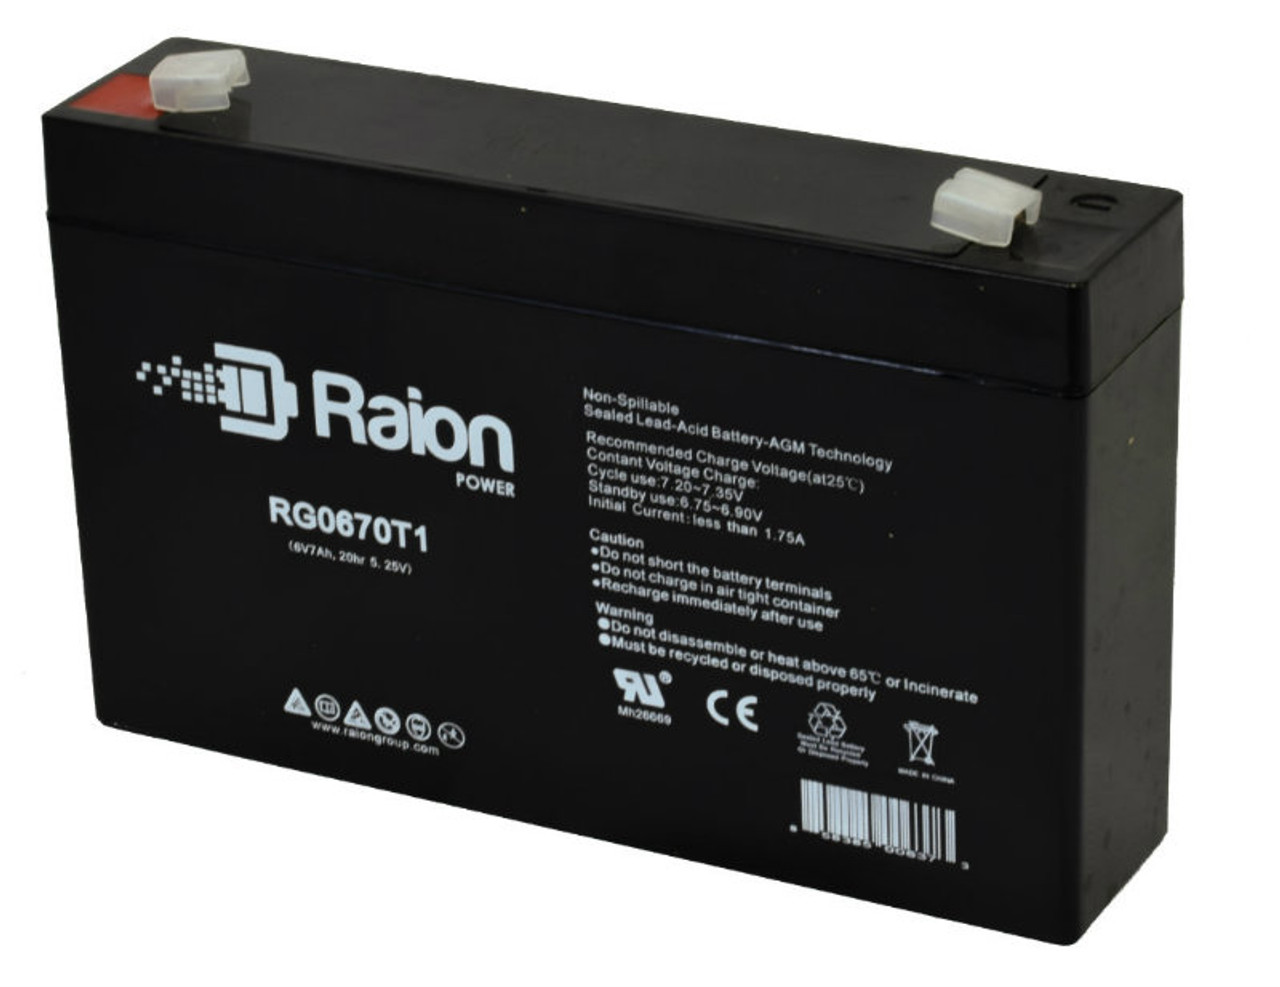 Raion Power RG0670T1 Replacement Battery for Telong TL672 OEM Battery